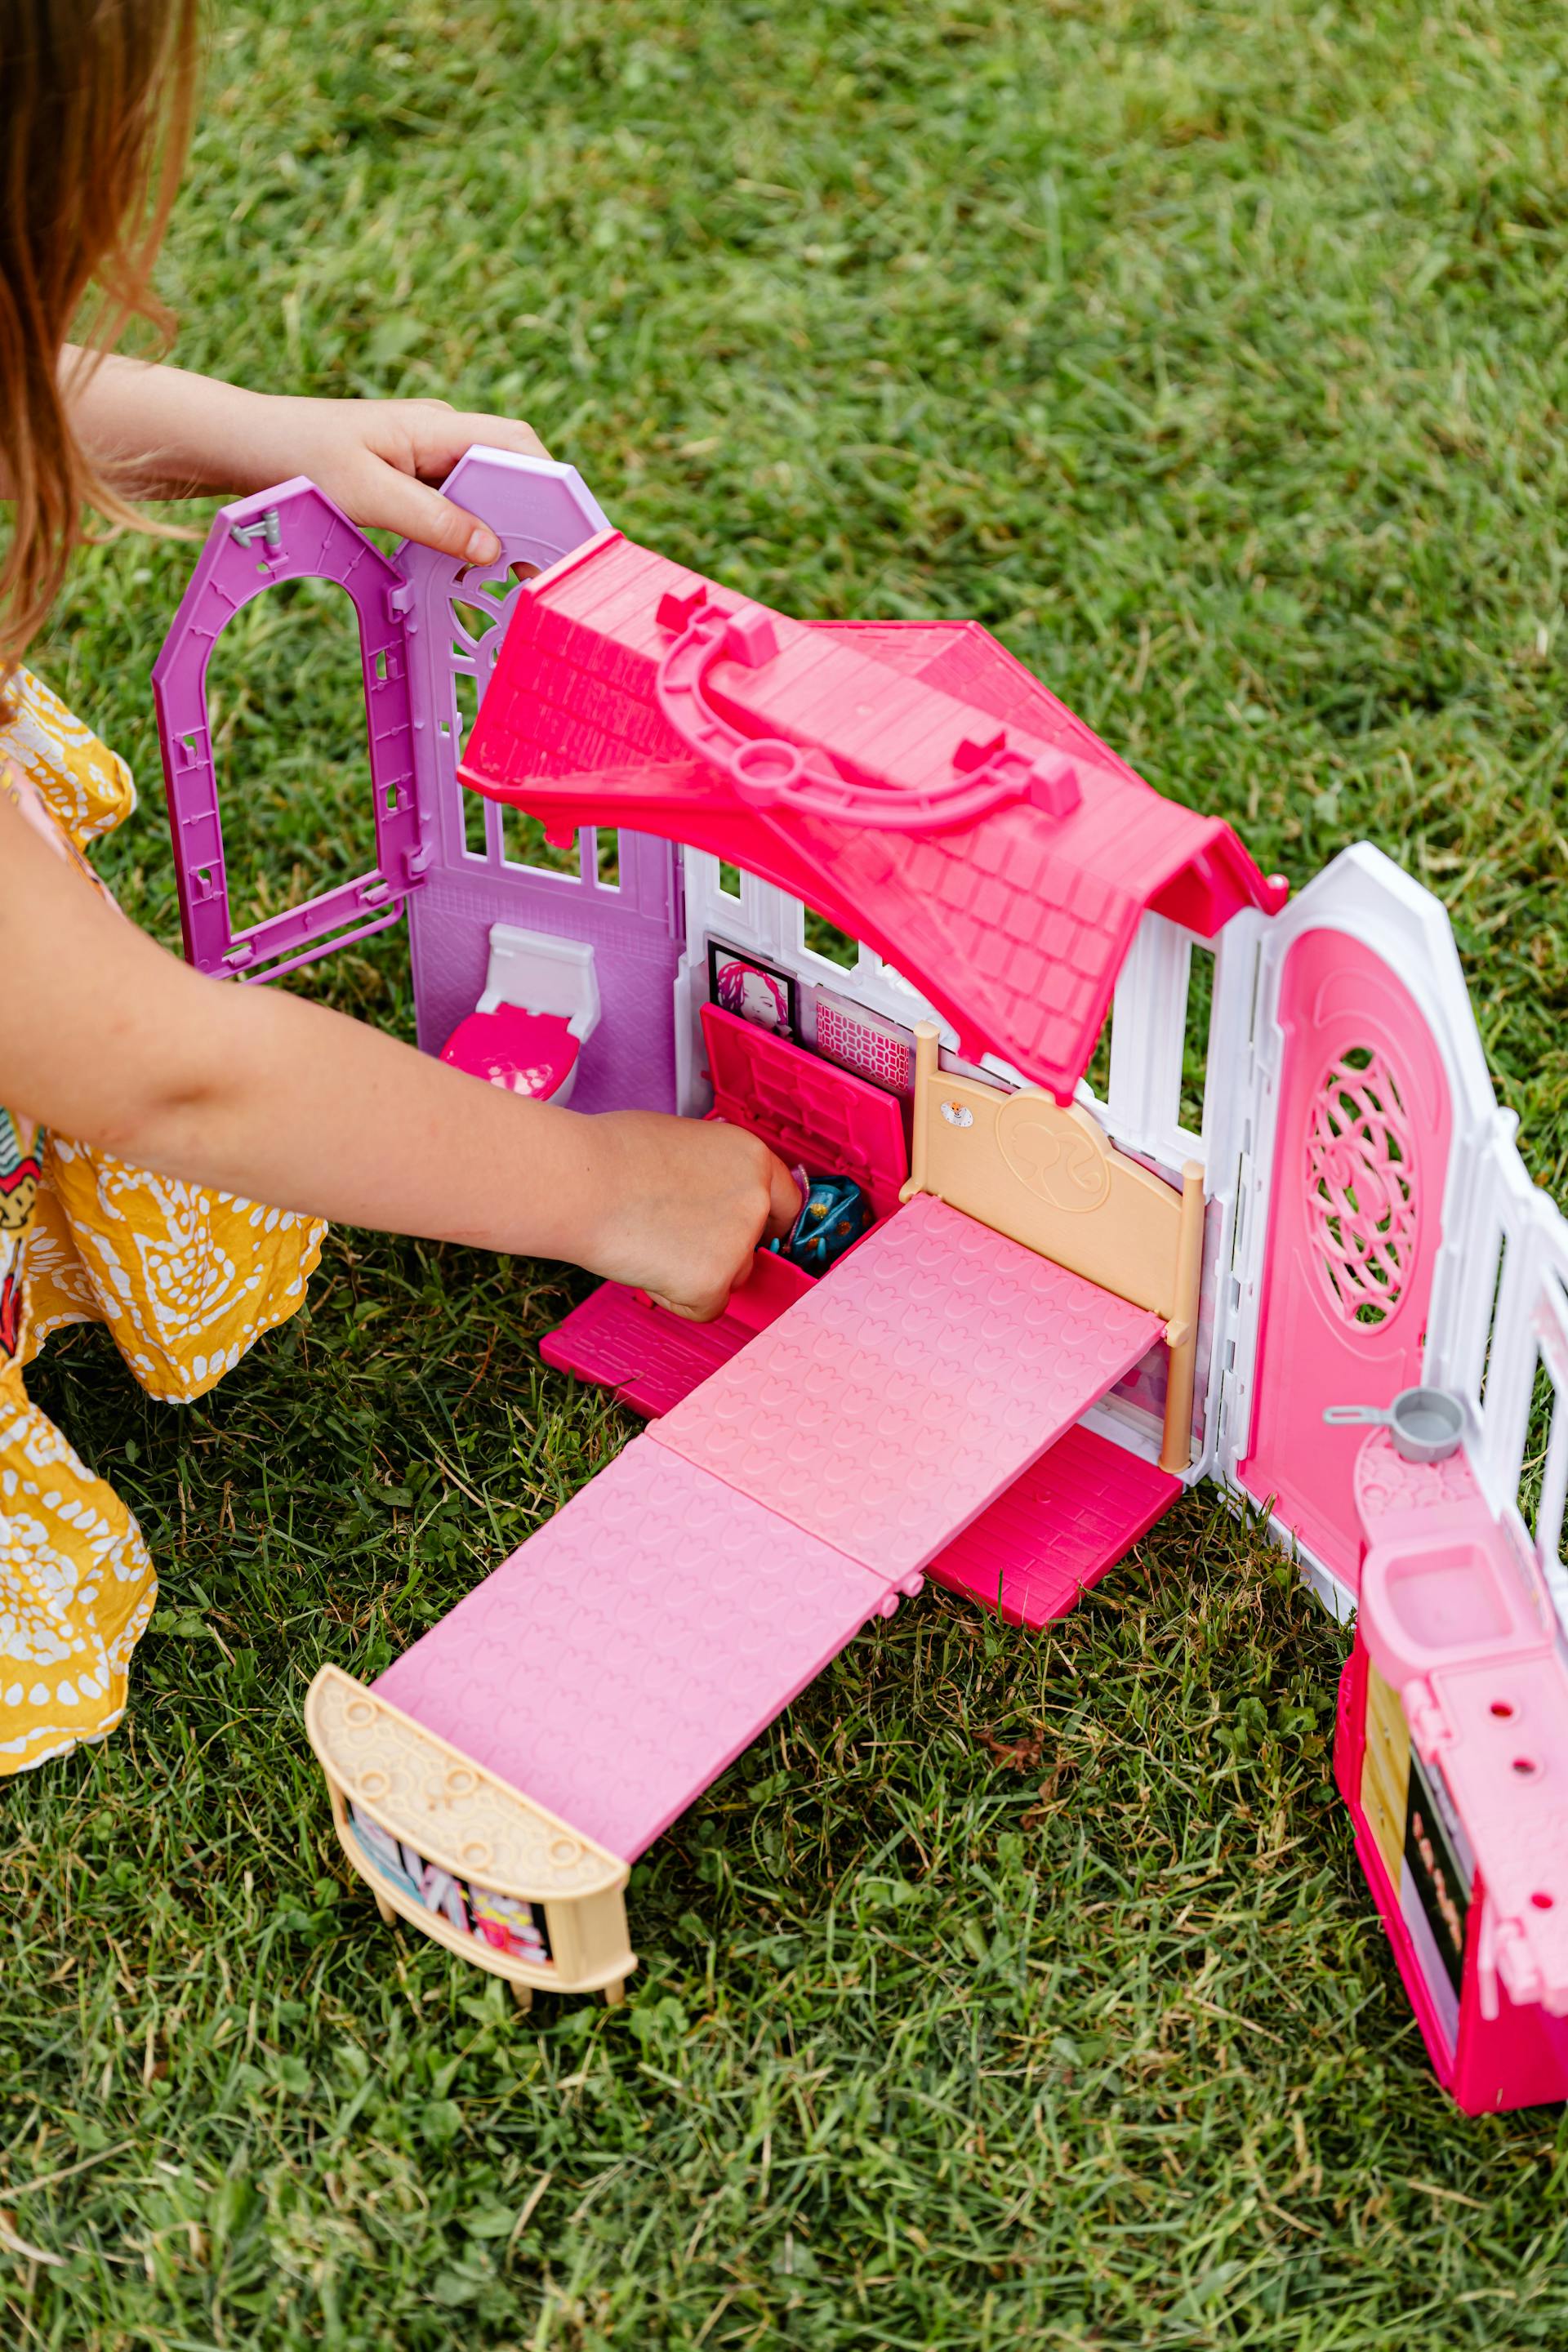 A little girl playing with a toy house | Source: Pexels